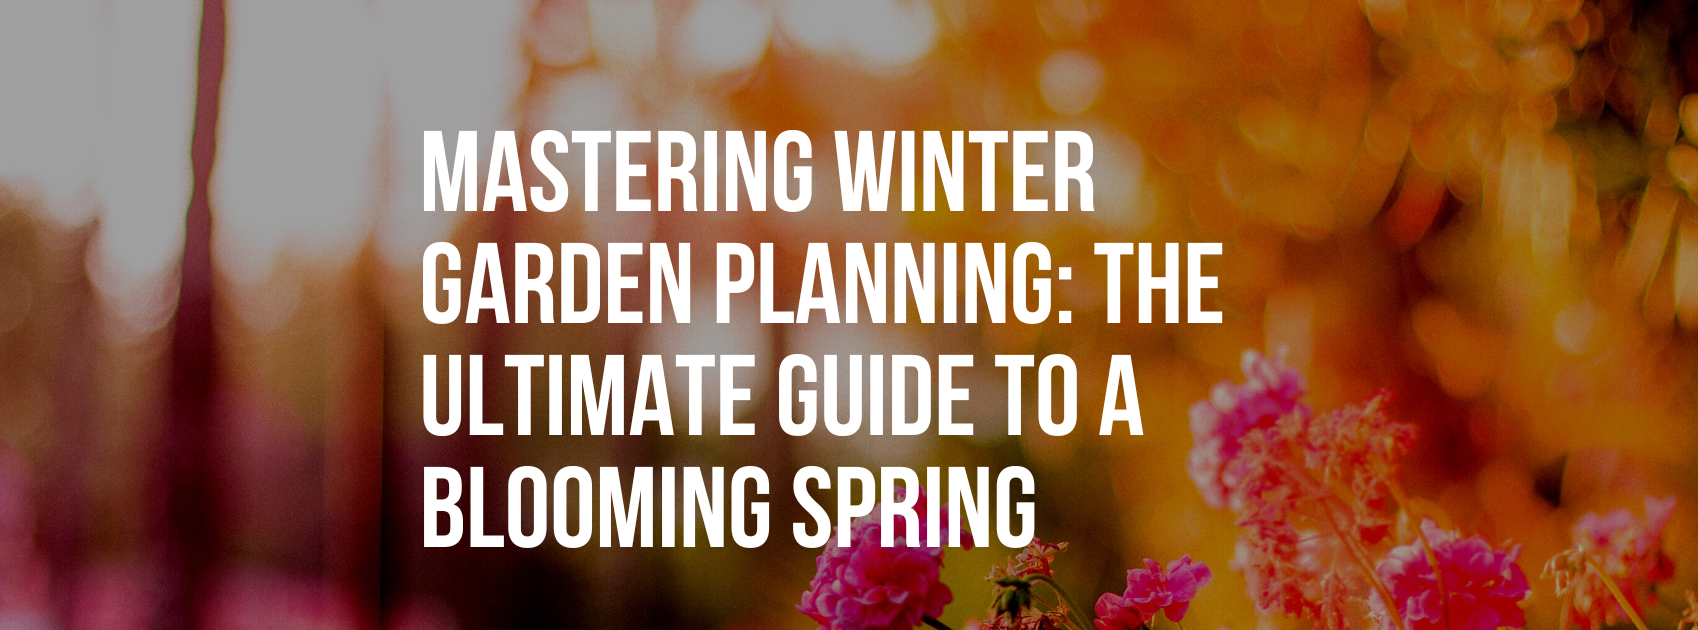 Mastering Winter Garden Planning: The Ultimate Guide to a Blooming Spring